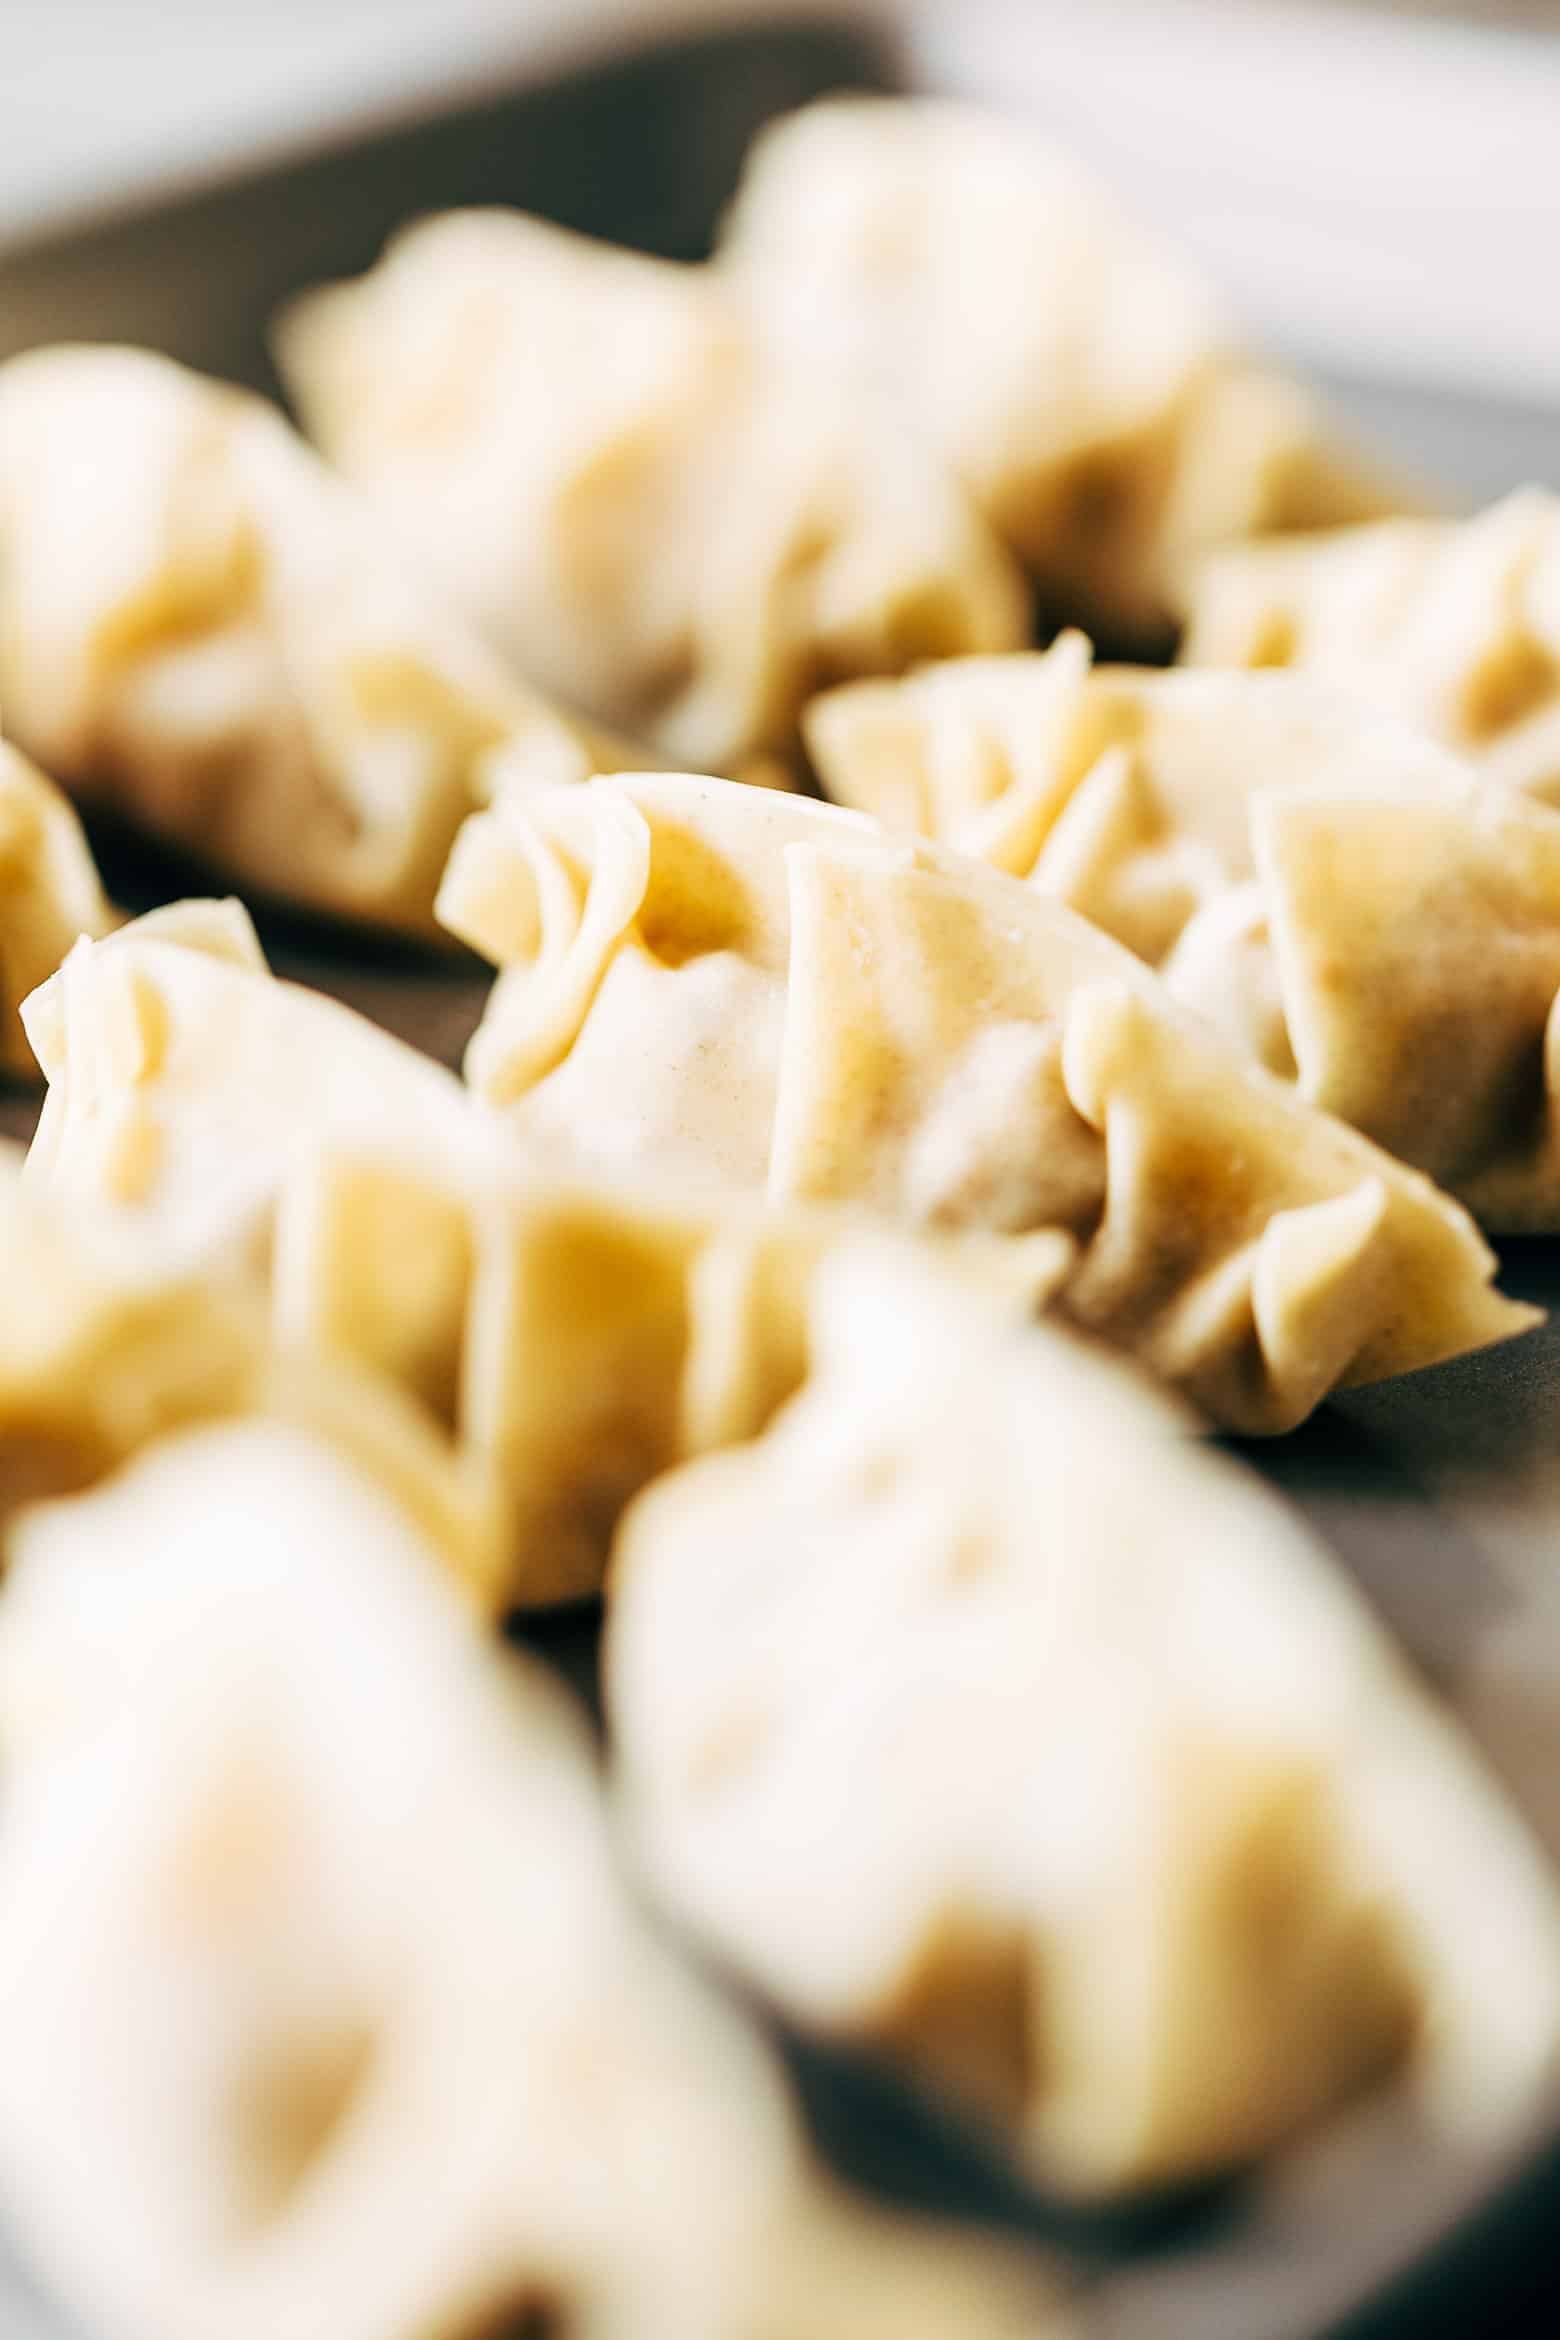 These vegetarian gyoza potstickers are stuffed with a delicious mixture of carrot, shiitake mushrooms and paneer and are insanely ease to make! Don't be intimidated because I have step by step instructions for you to make them at home.